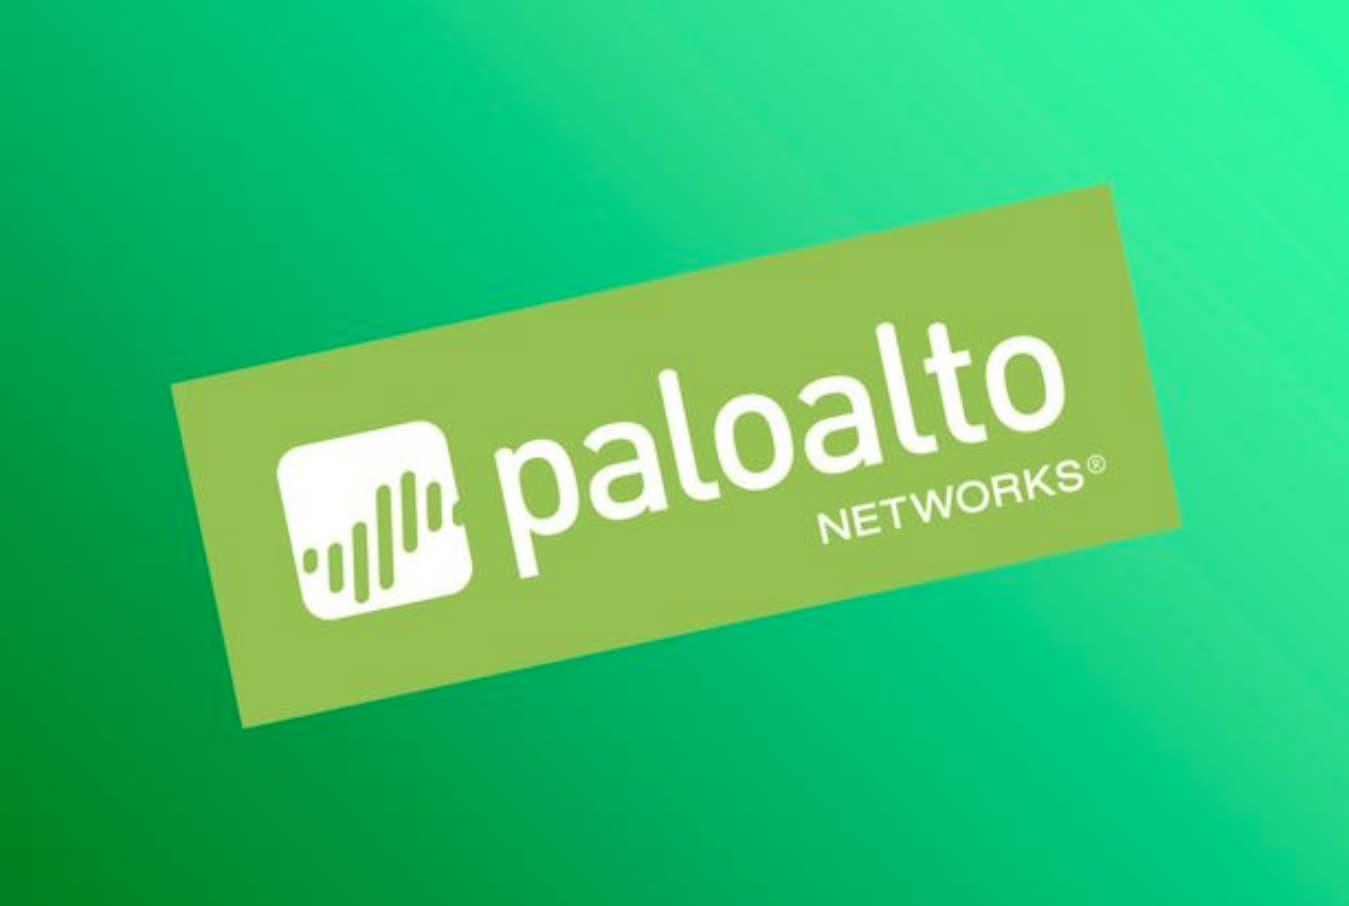 Private Details Of Palo Alto Networks Employees Leaked Online